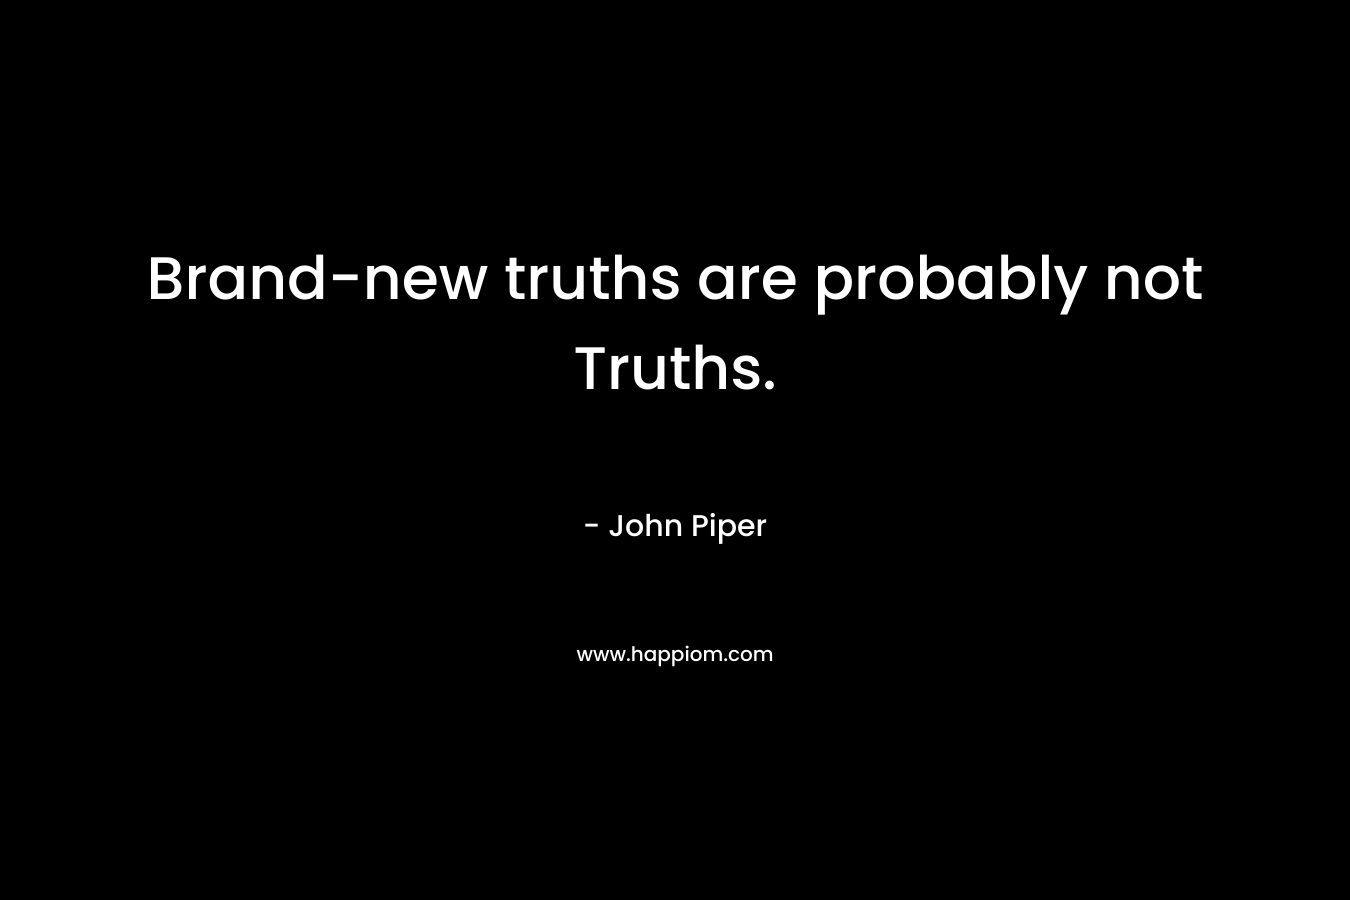 Brand-new truths are probably not Truths. – John Piper